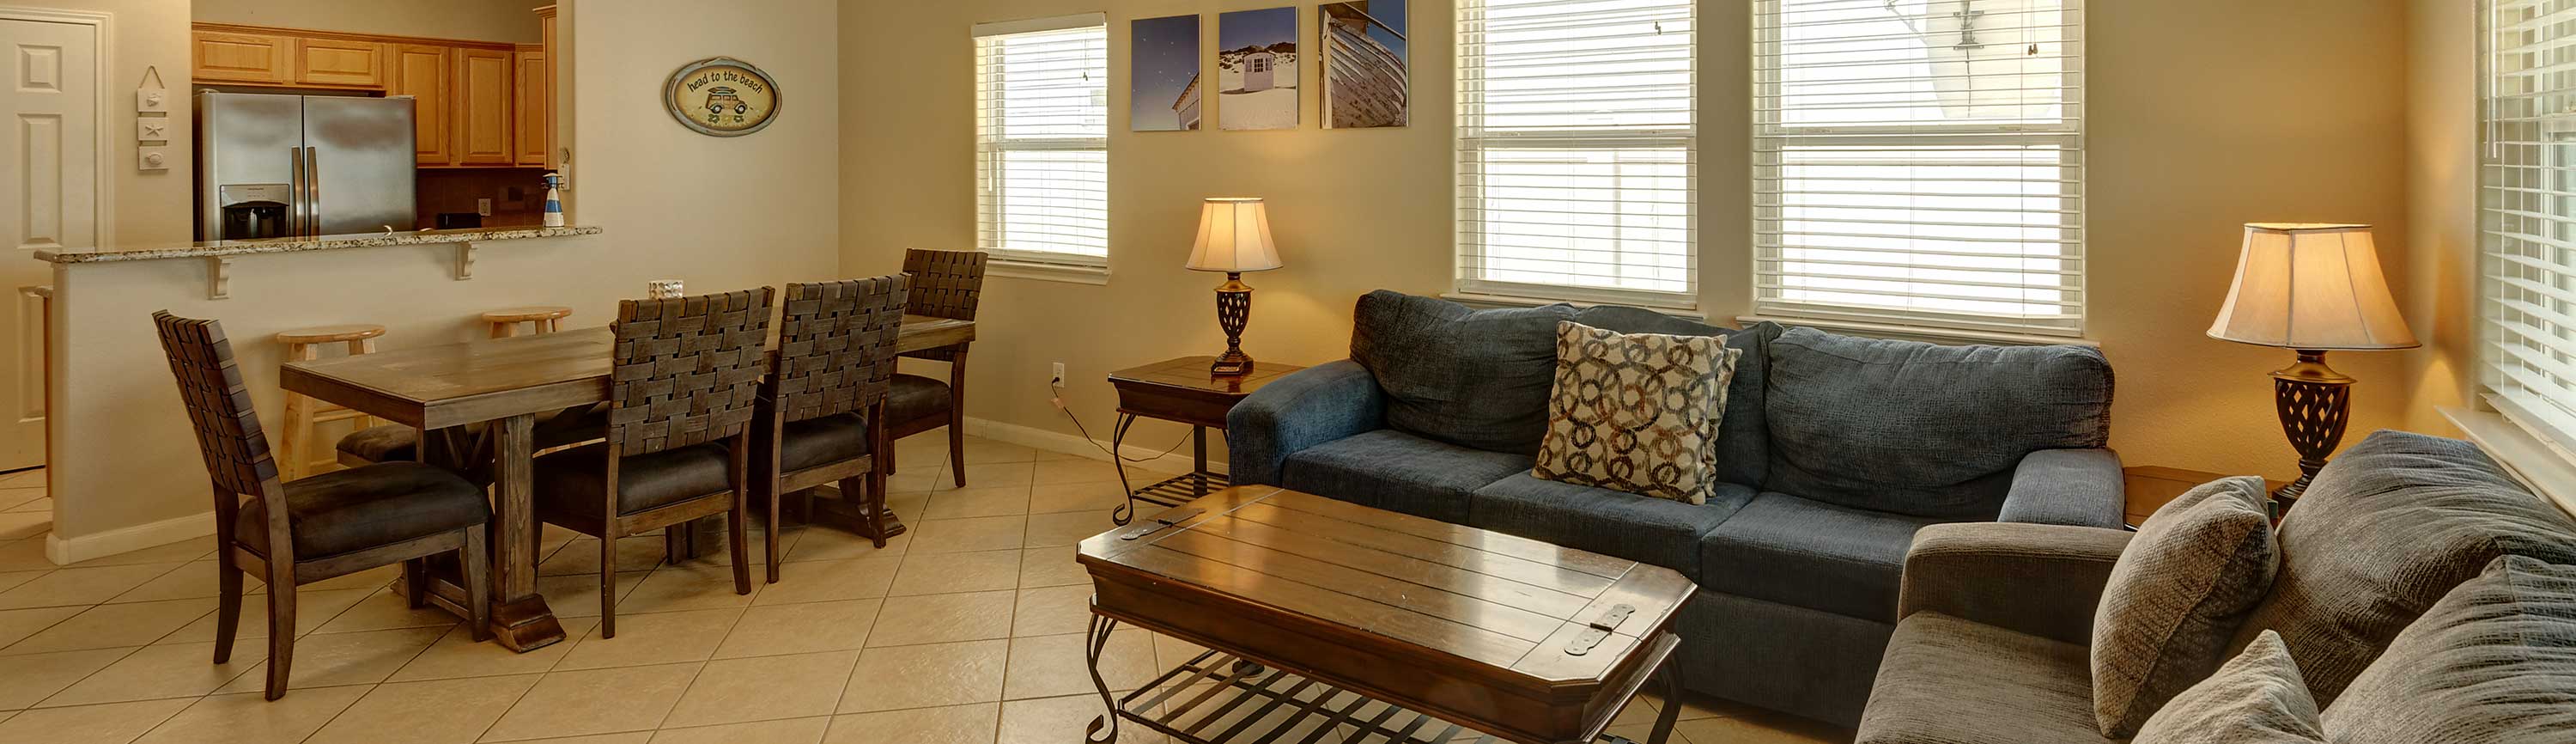 Come and stay at Millers Landing in Port Aransas